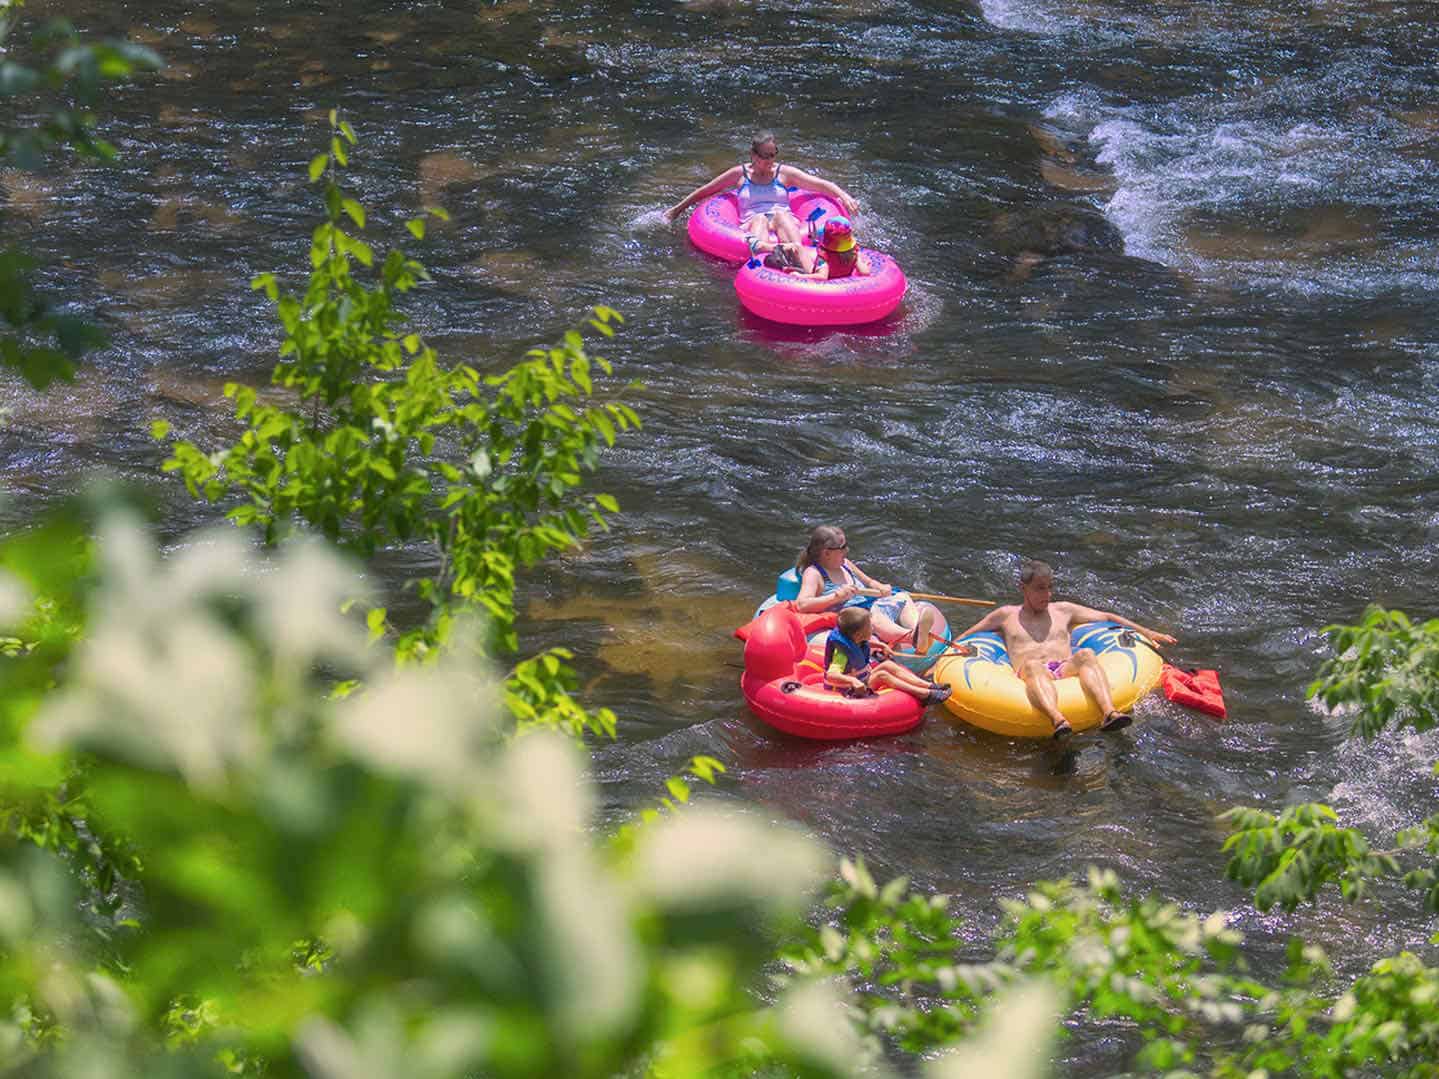 Rafters on the Toccoa River floating in pink, yellow, and red inner tubes.